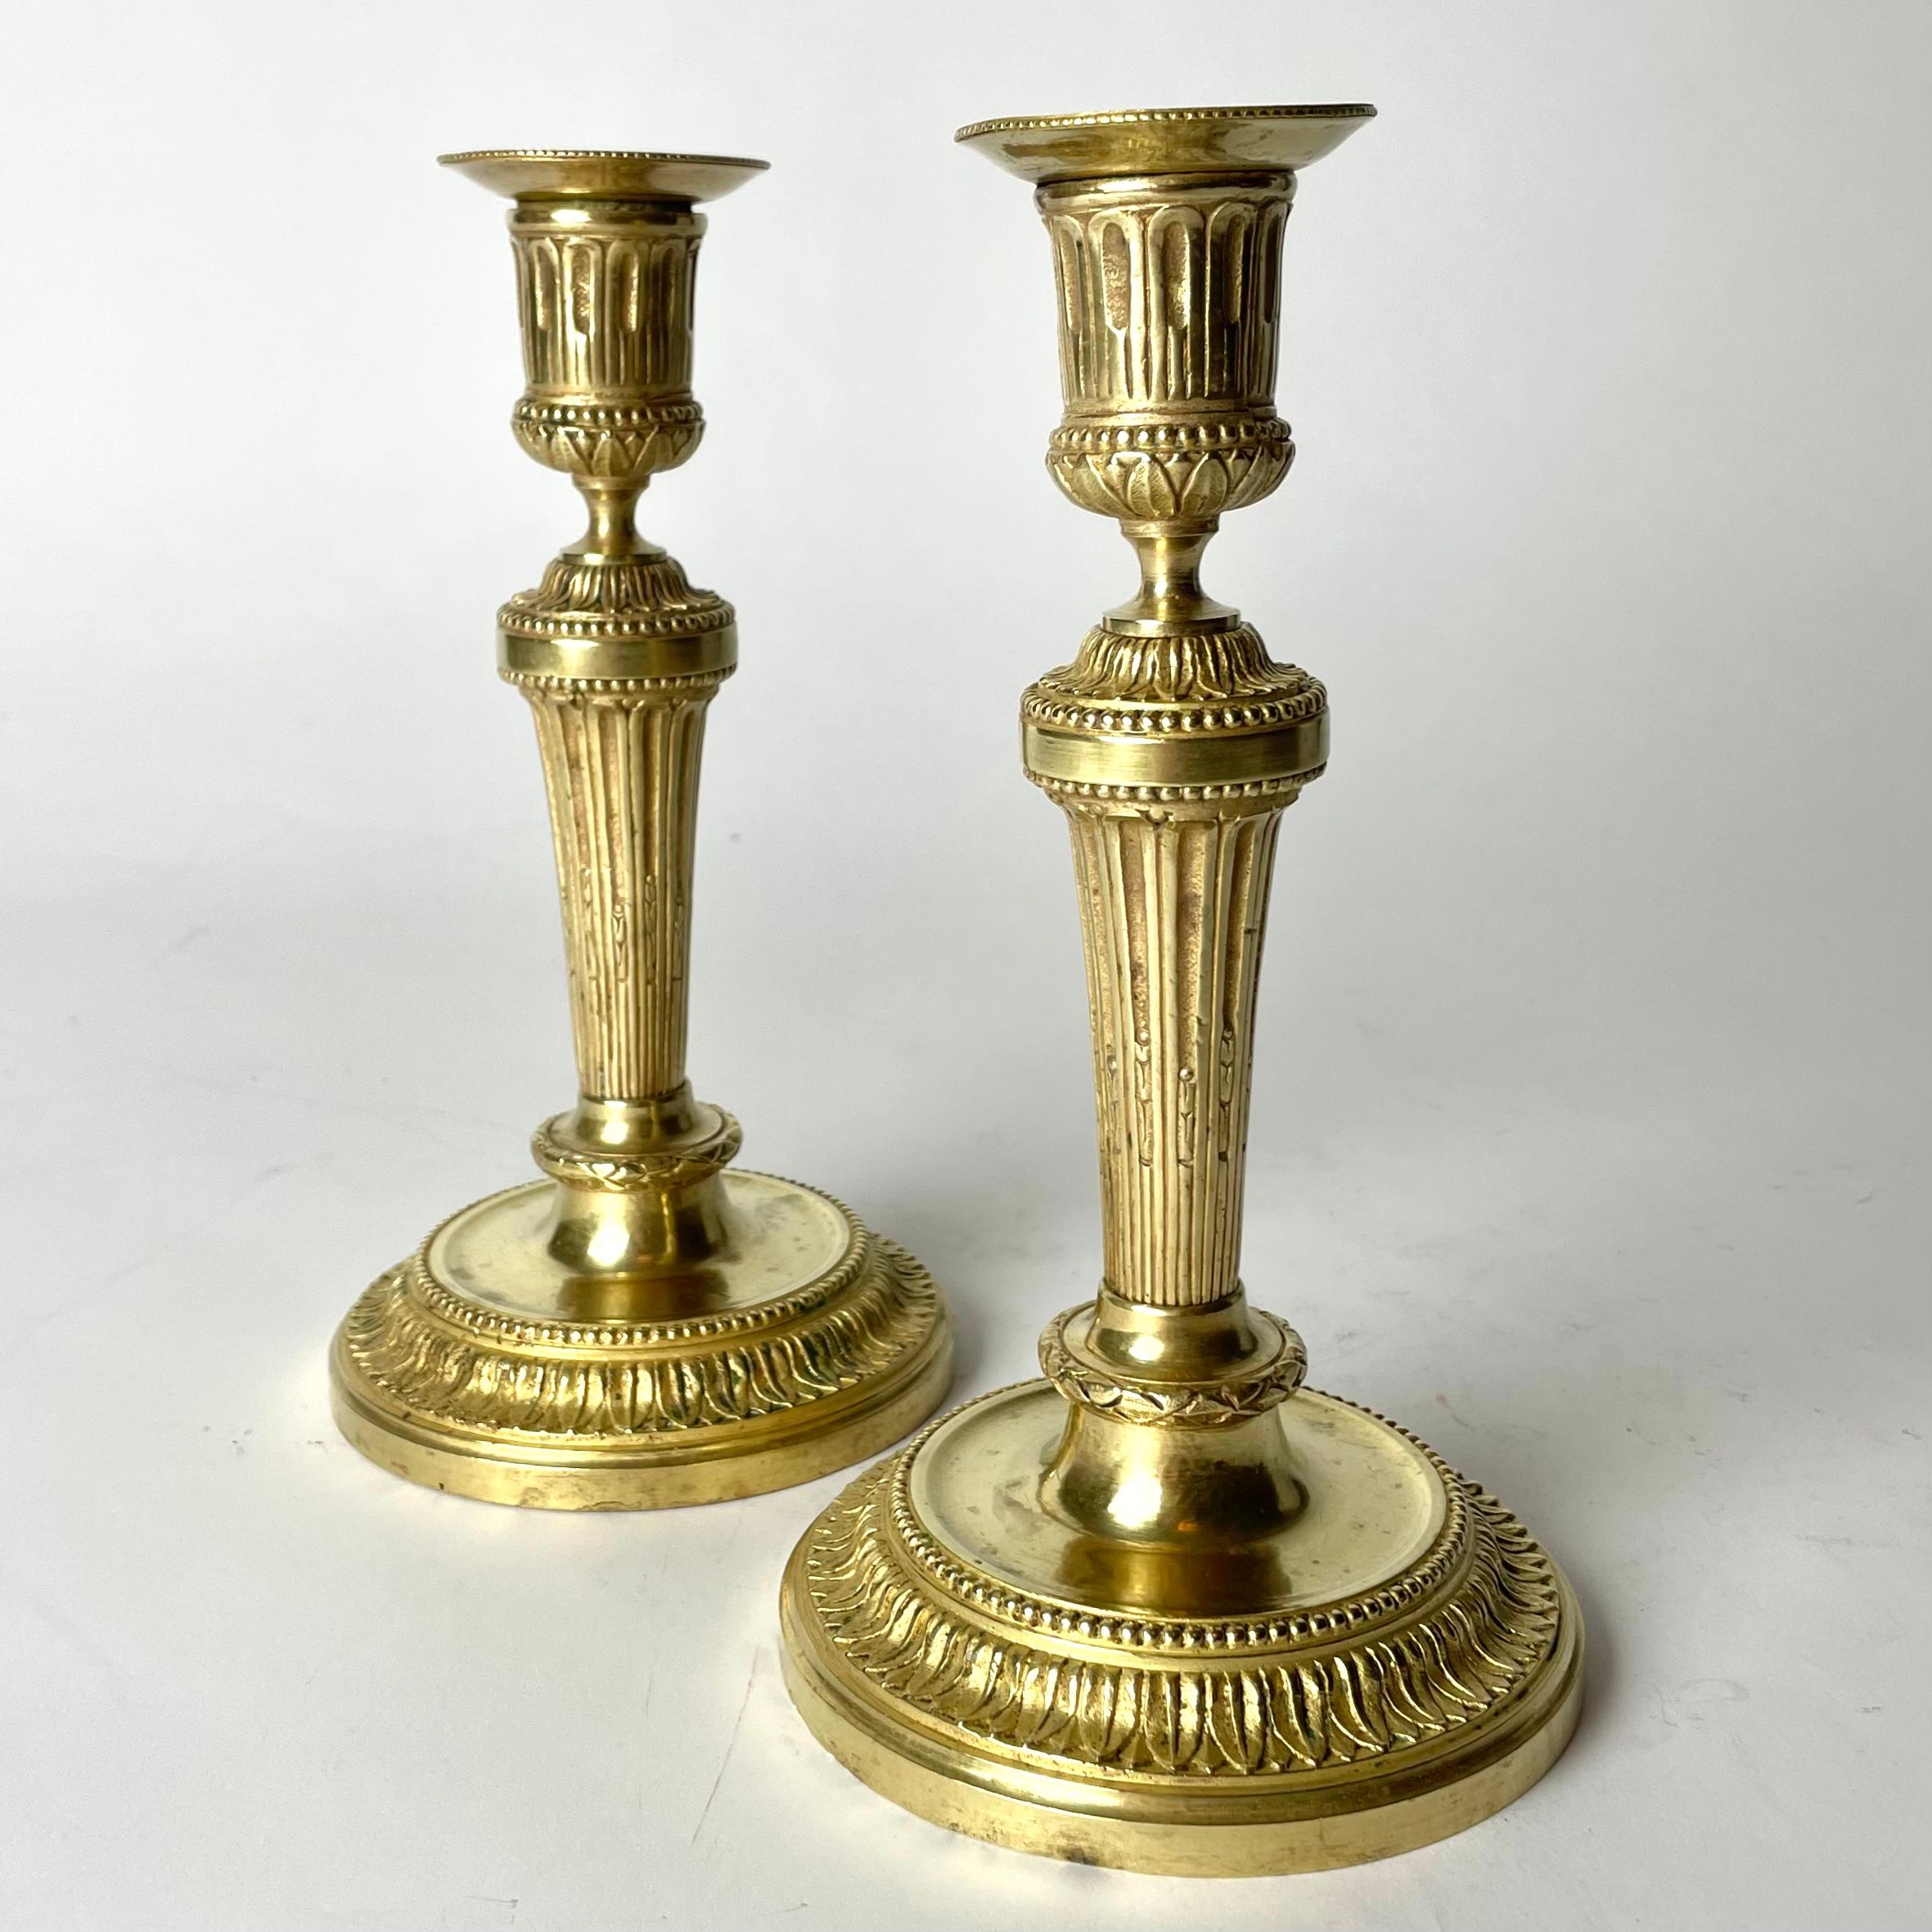 A Pair of Elegant and Ornate Gilt Bronze Candlesticks from the 19th Century. In the style of Directoire.


Wear consistent with age and use